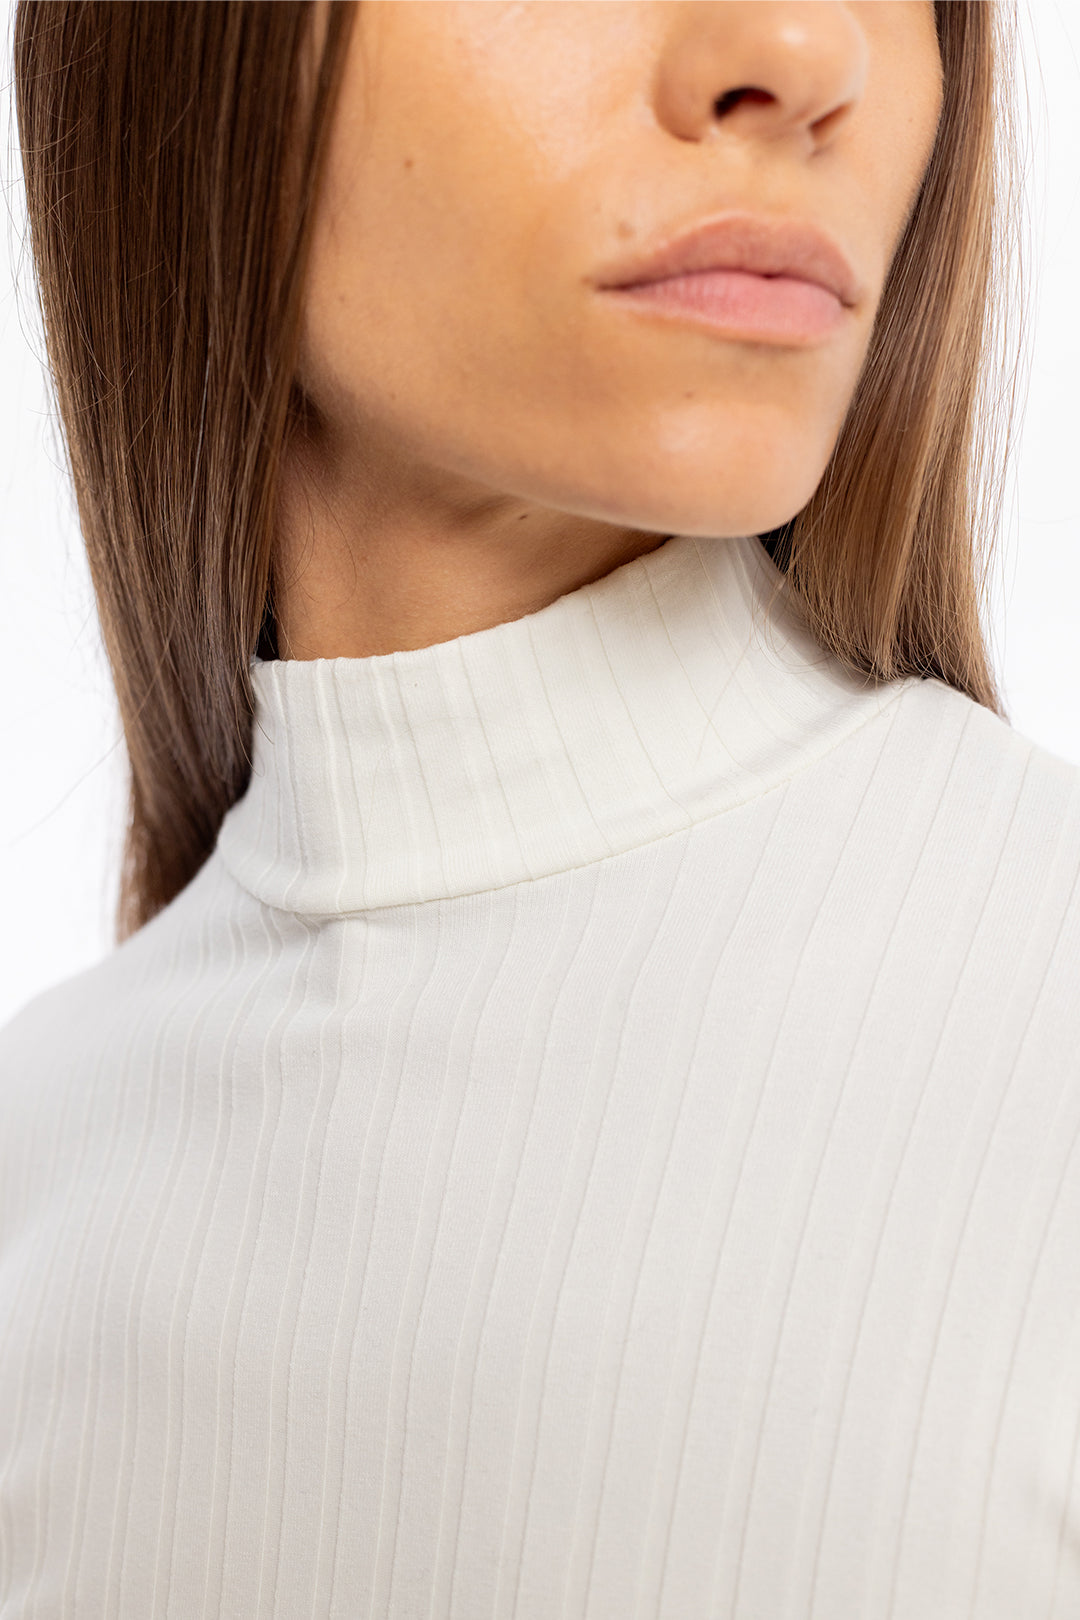 White, ribbed long-sleeved shirt made of organic cotton from Rotholz